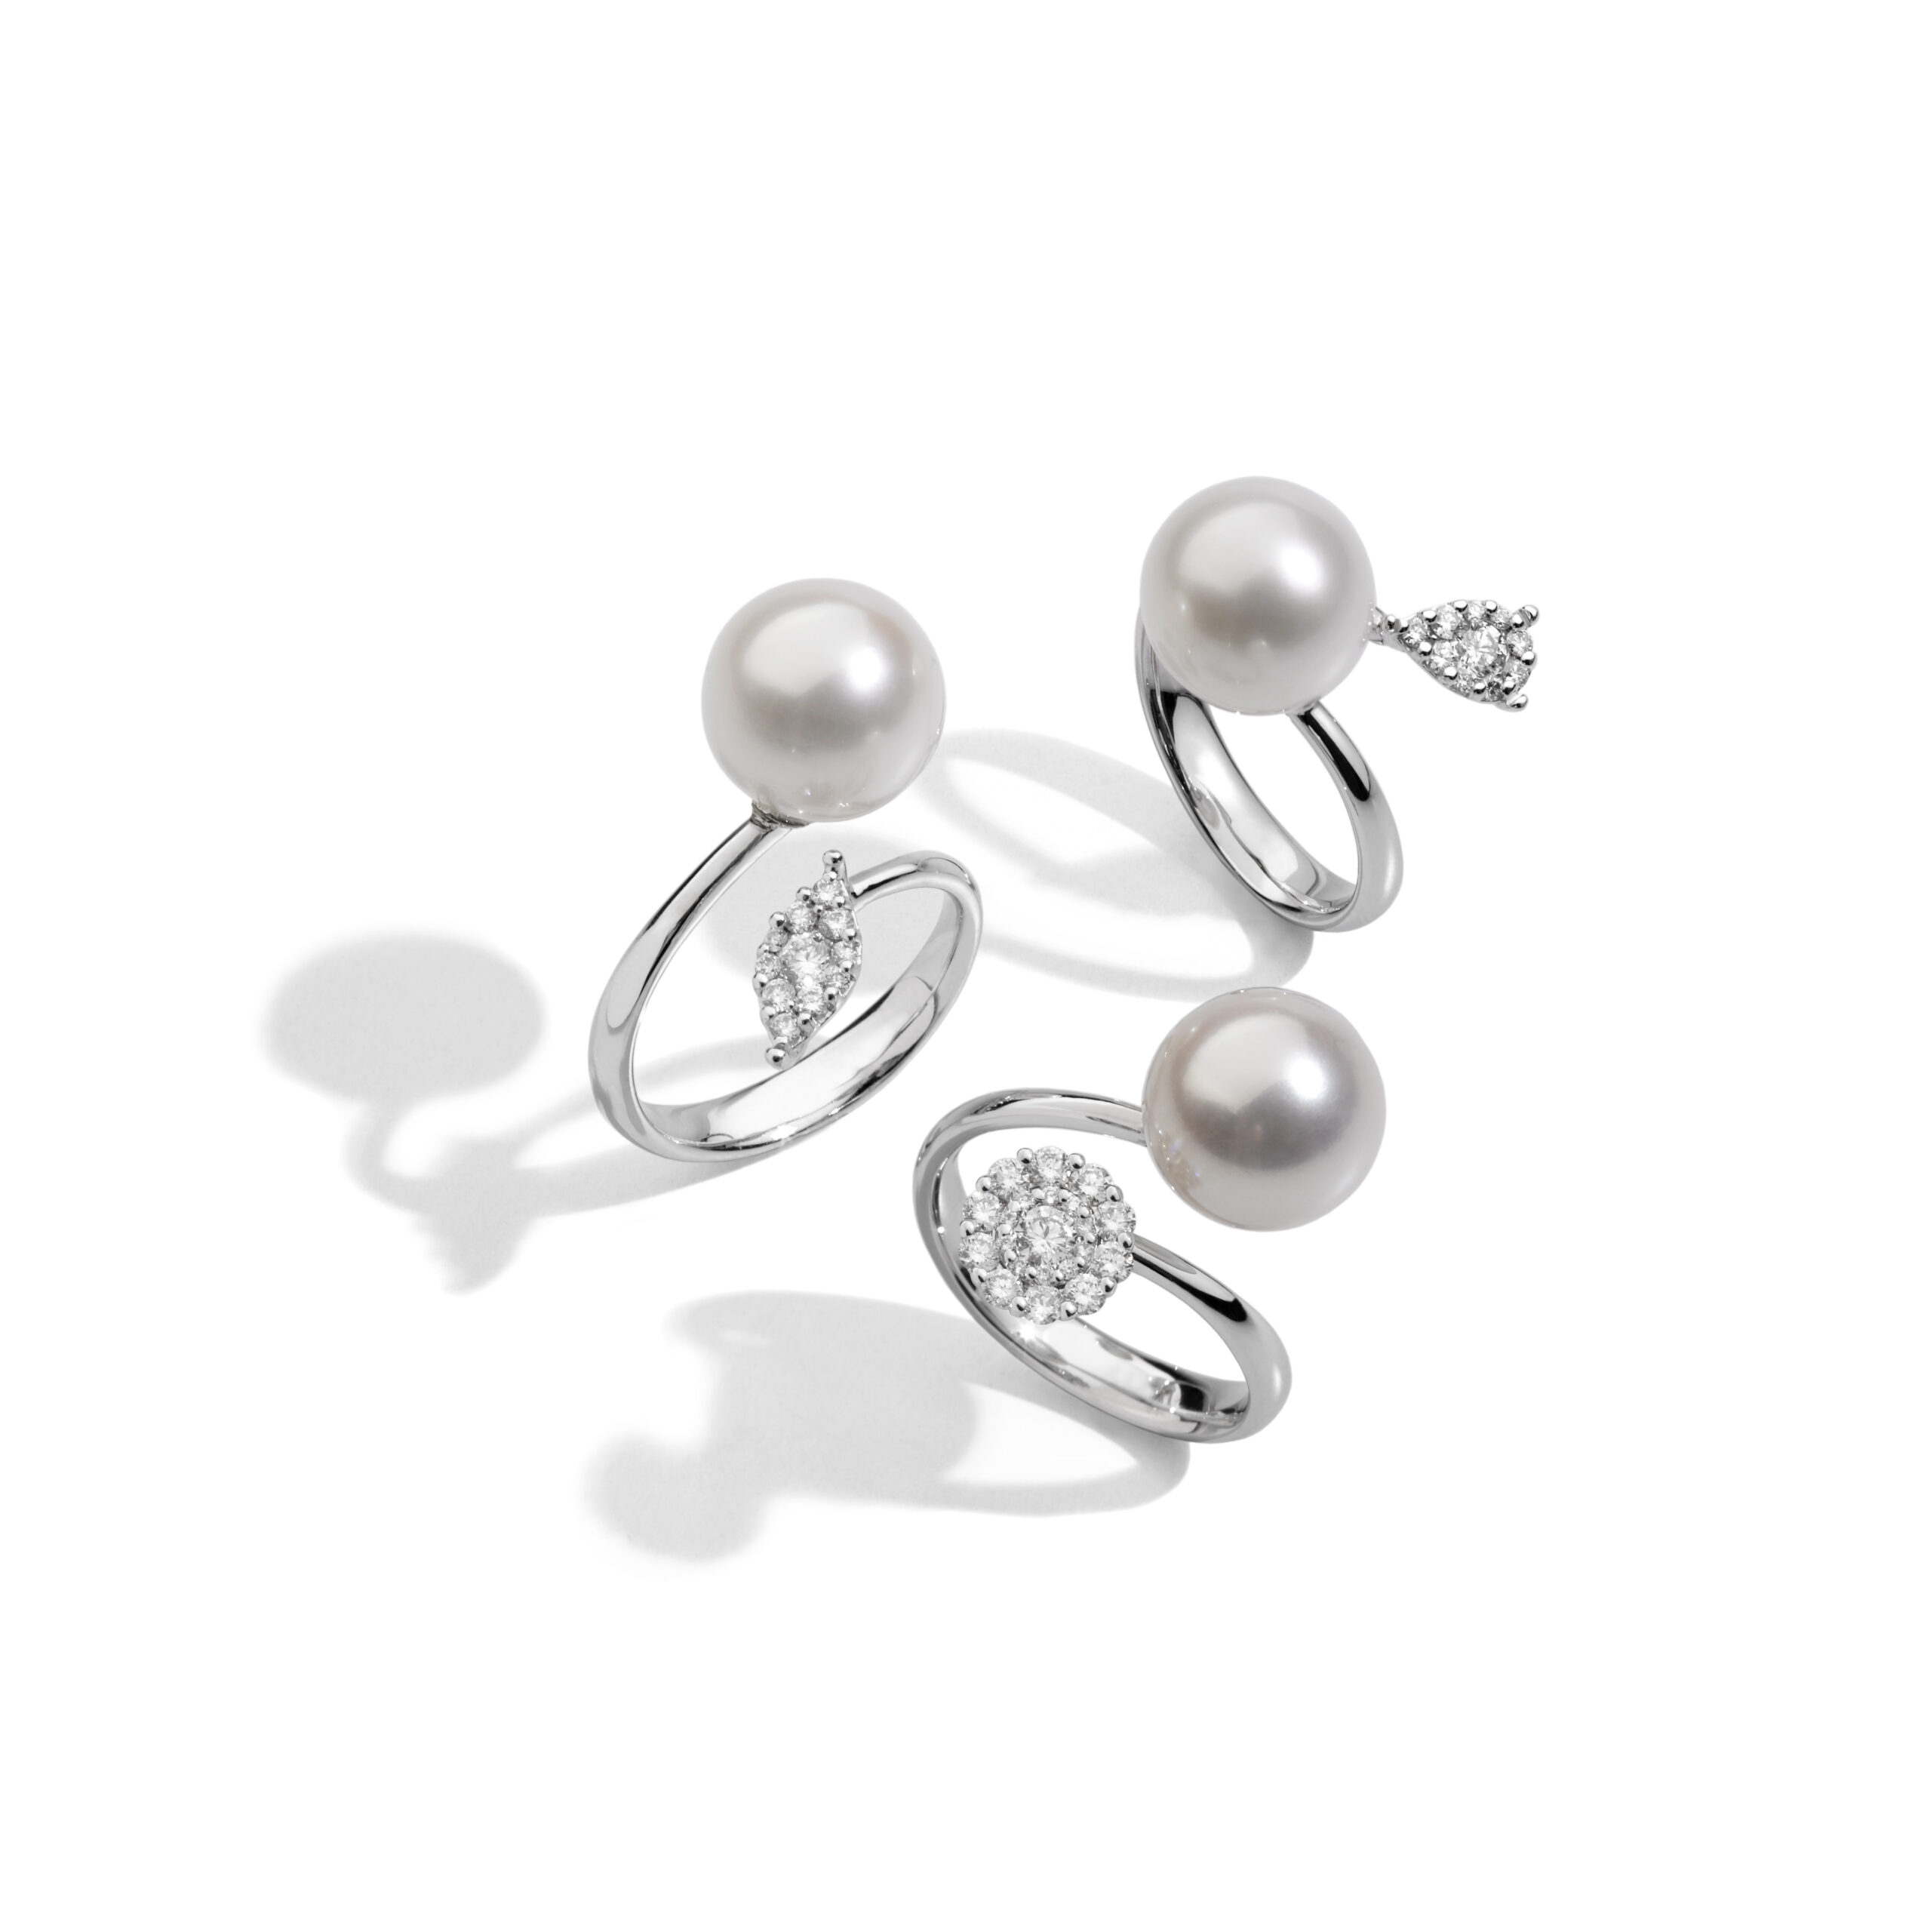 My song collection with Freshwater pearls and diamonds